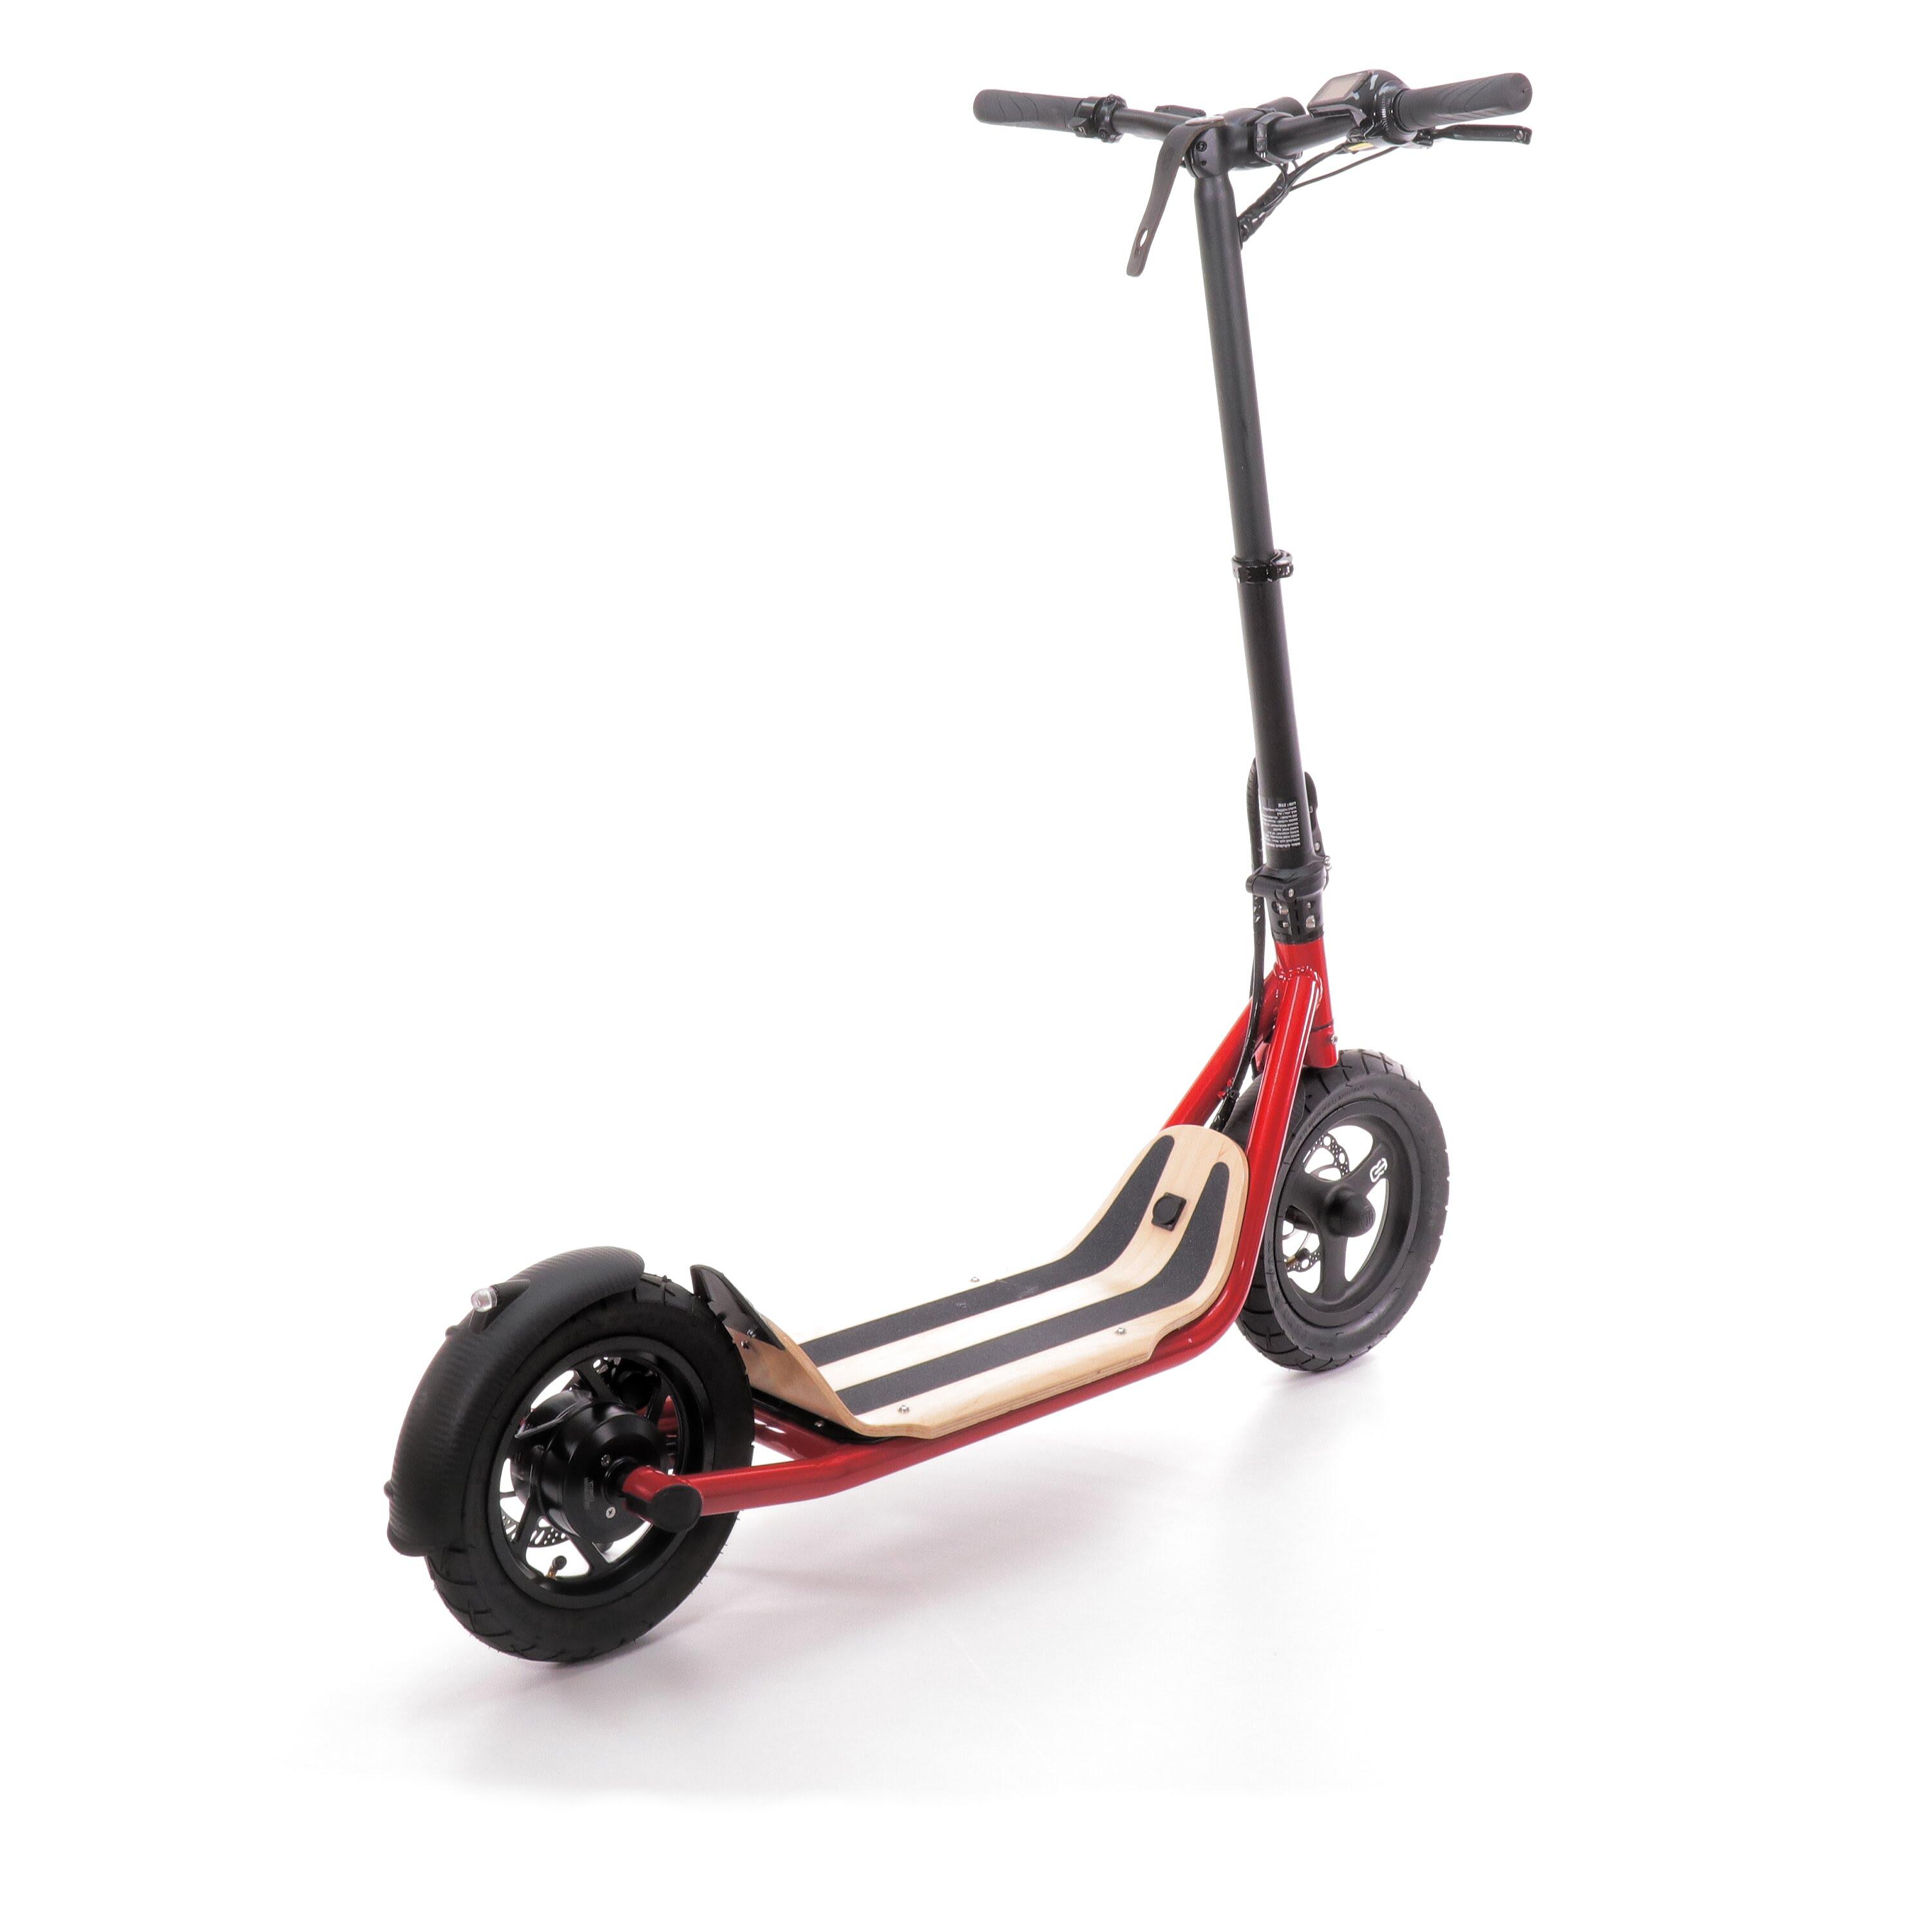 8Tev Adult Electric Scooter, B12 Proxi, Red 3/5